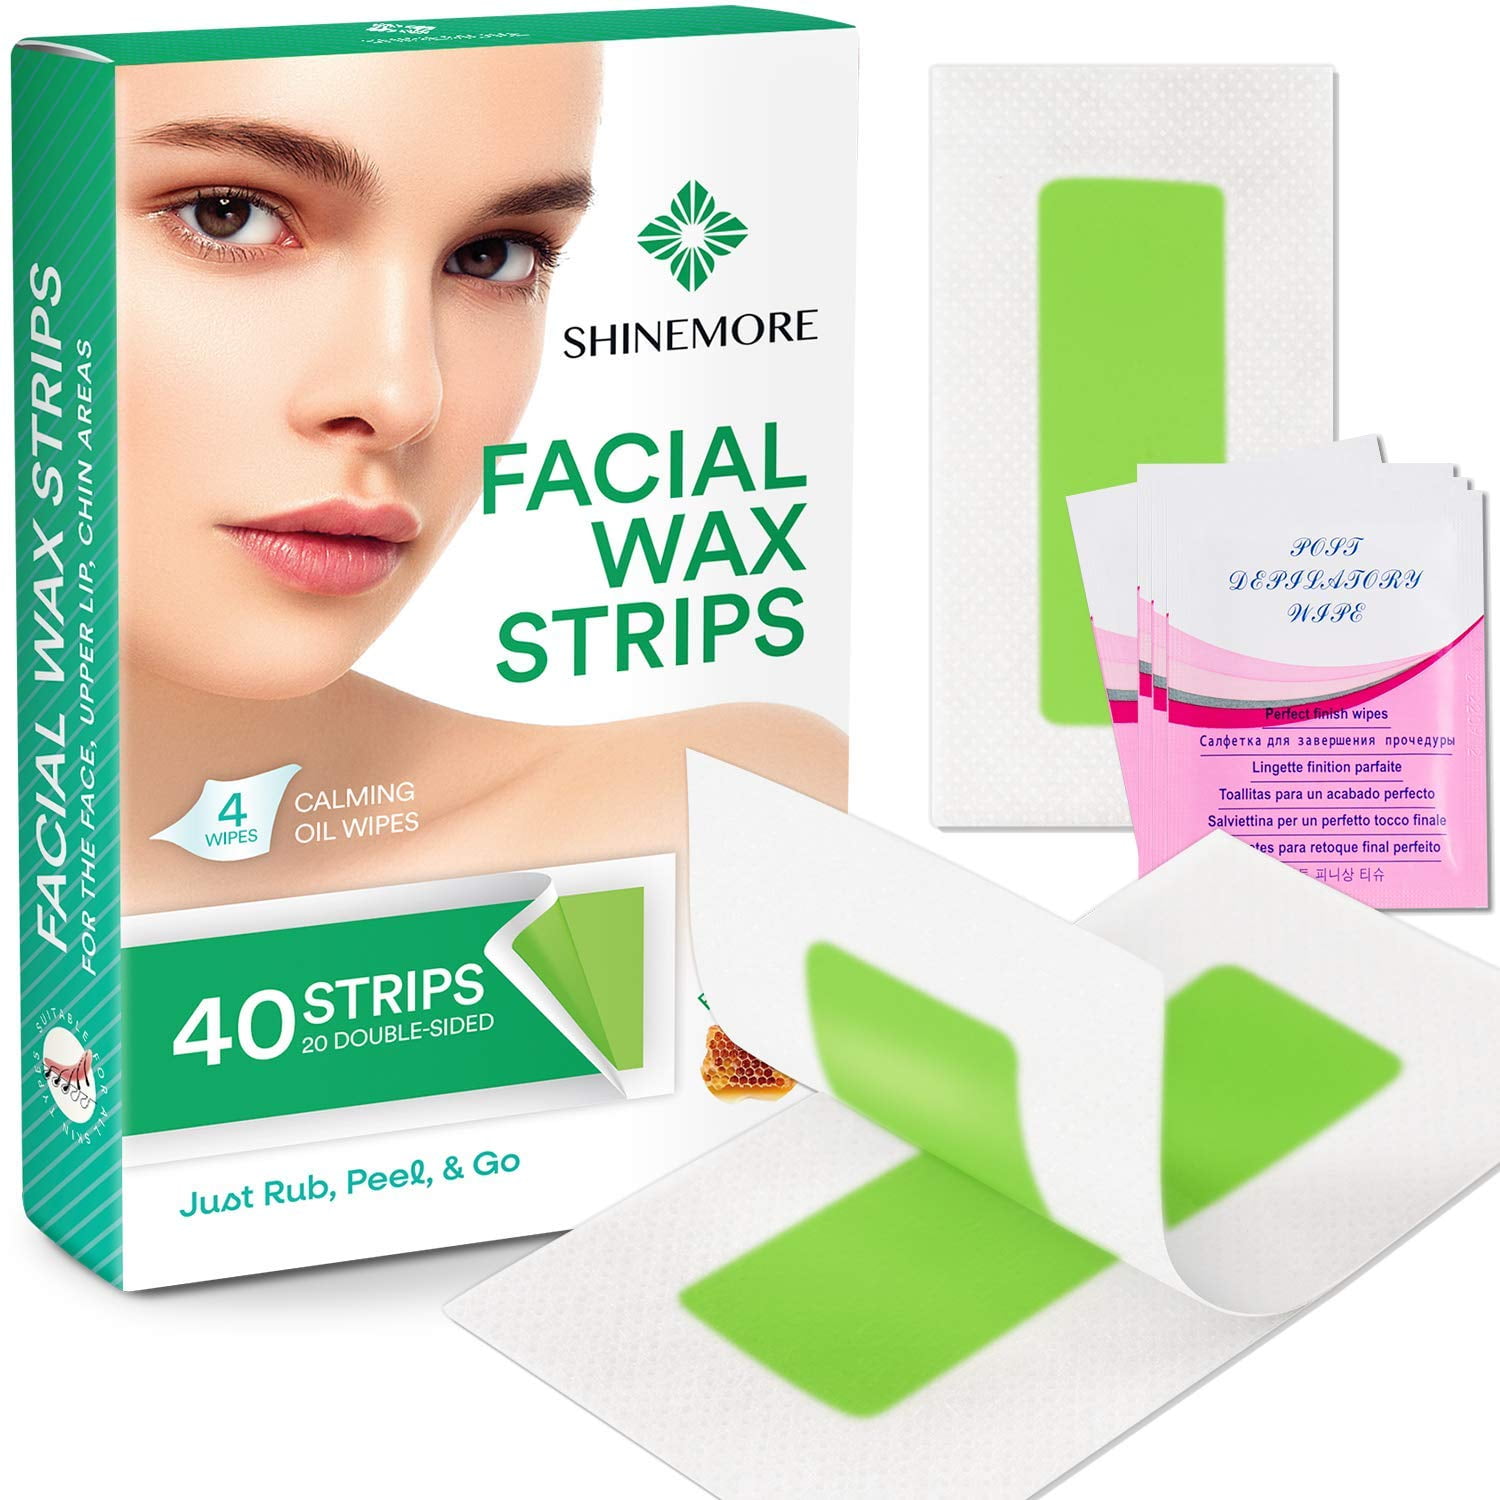 ShineMore Facial Wax Strips - Facial Hair Removal For Women - Gentle and  Fast-Working for Face, Eyebrow, Upper Lip, Chin - For All Skin Types (40 Wax  Strips + 4 Calming Oil Wipes) 